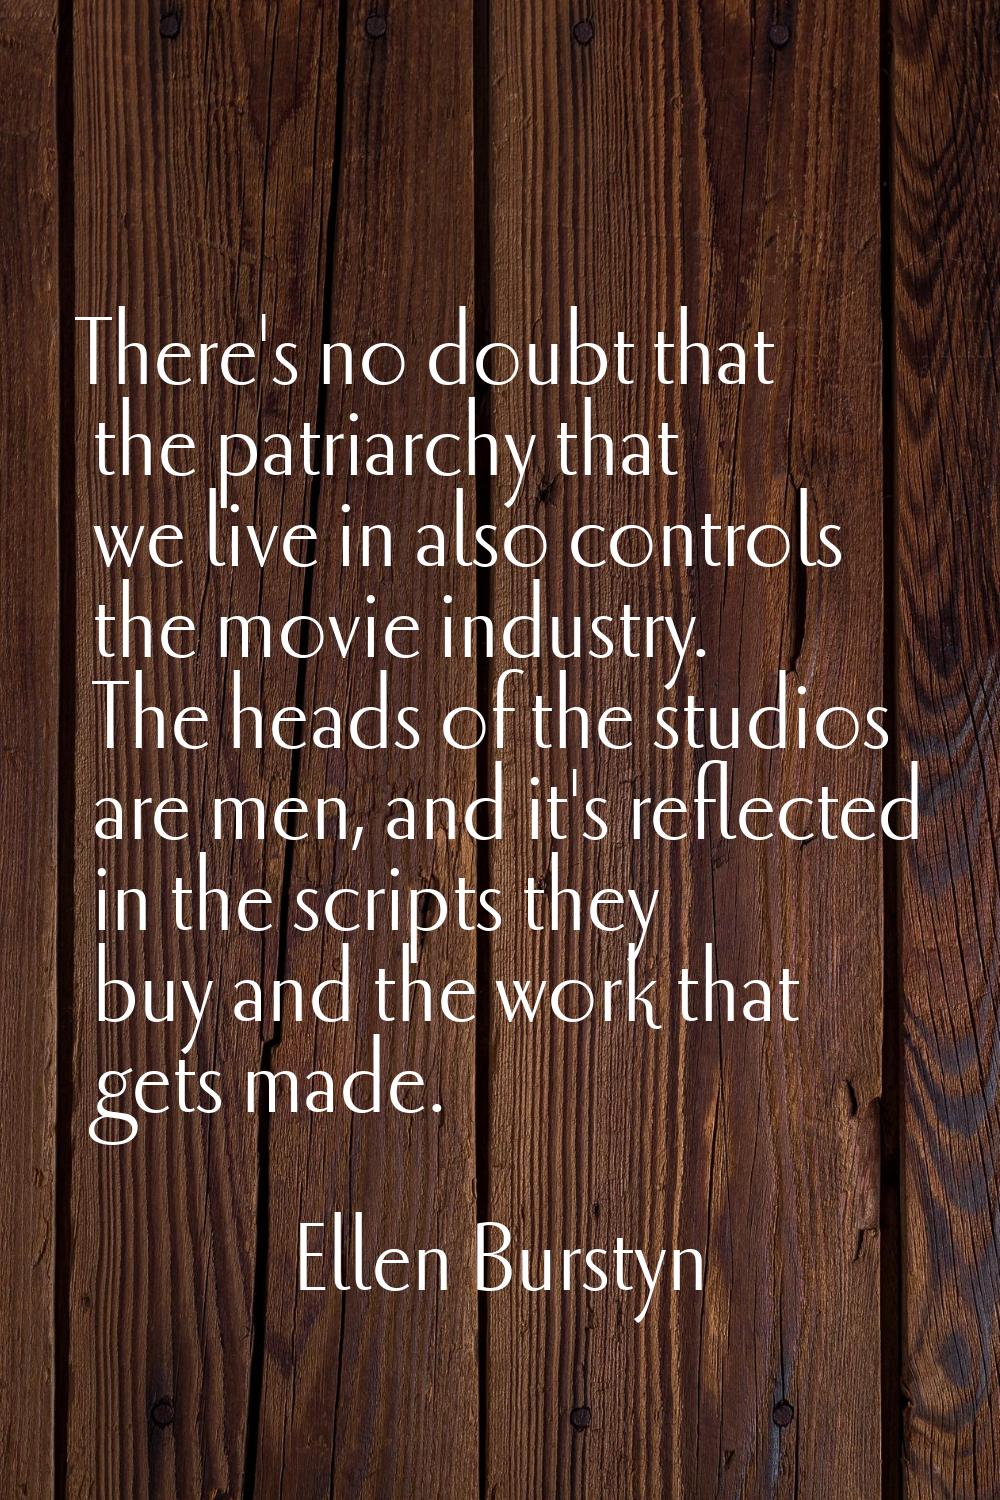 There's no doubt that the patriarchy that we live in also controls the movie industry. The heads of